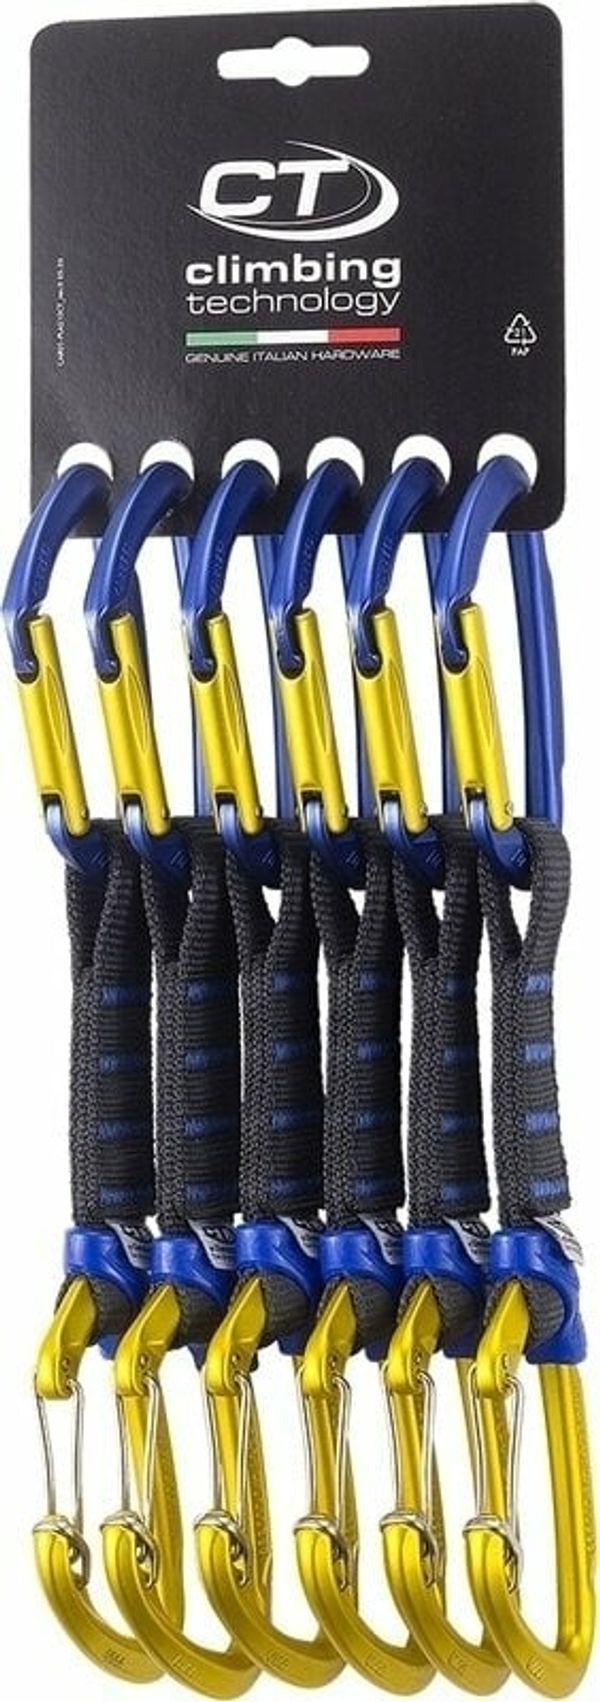 Climbing Technology Climbing Technology Berry Set NY Pro Quickdraw Blue/Gold Solid Straight/Wire Straight Gate 12.0